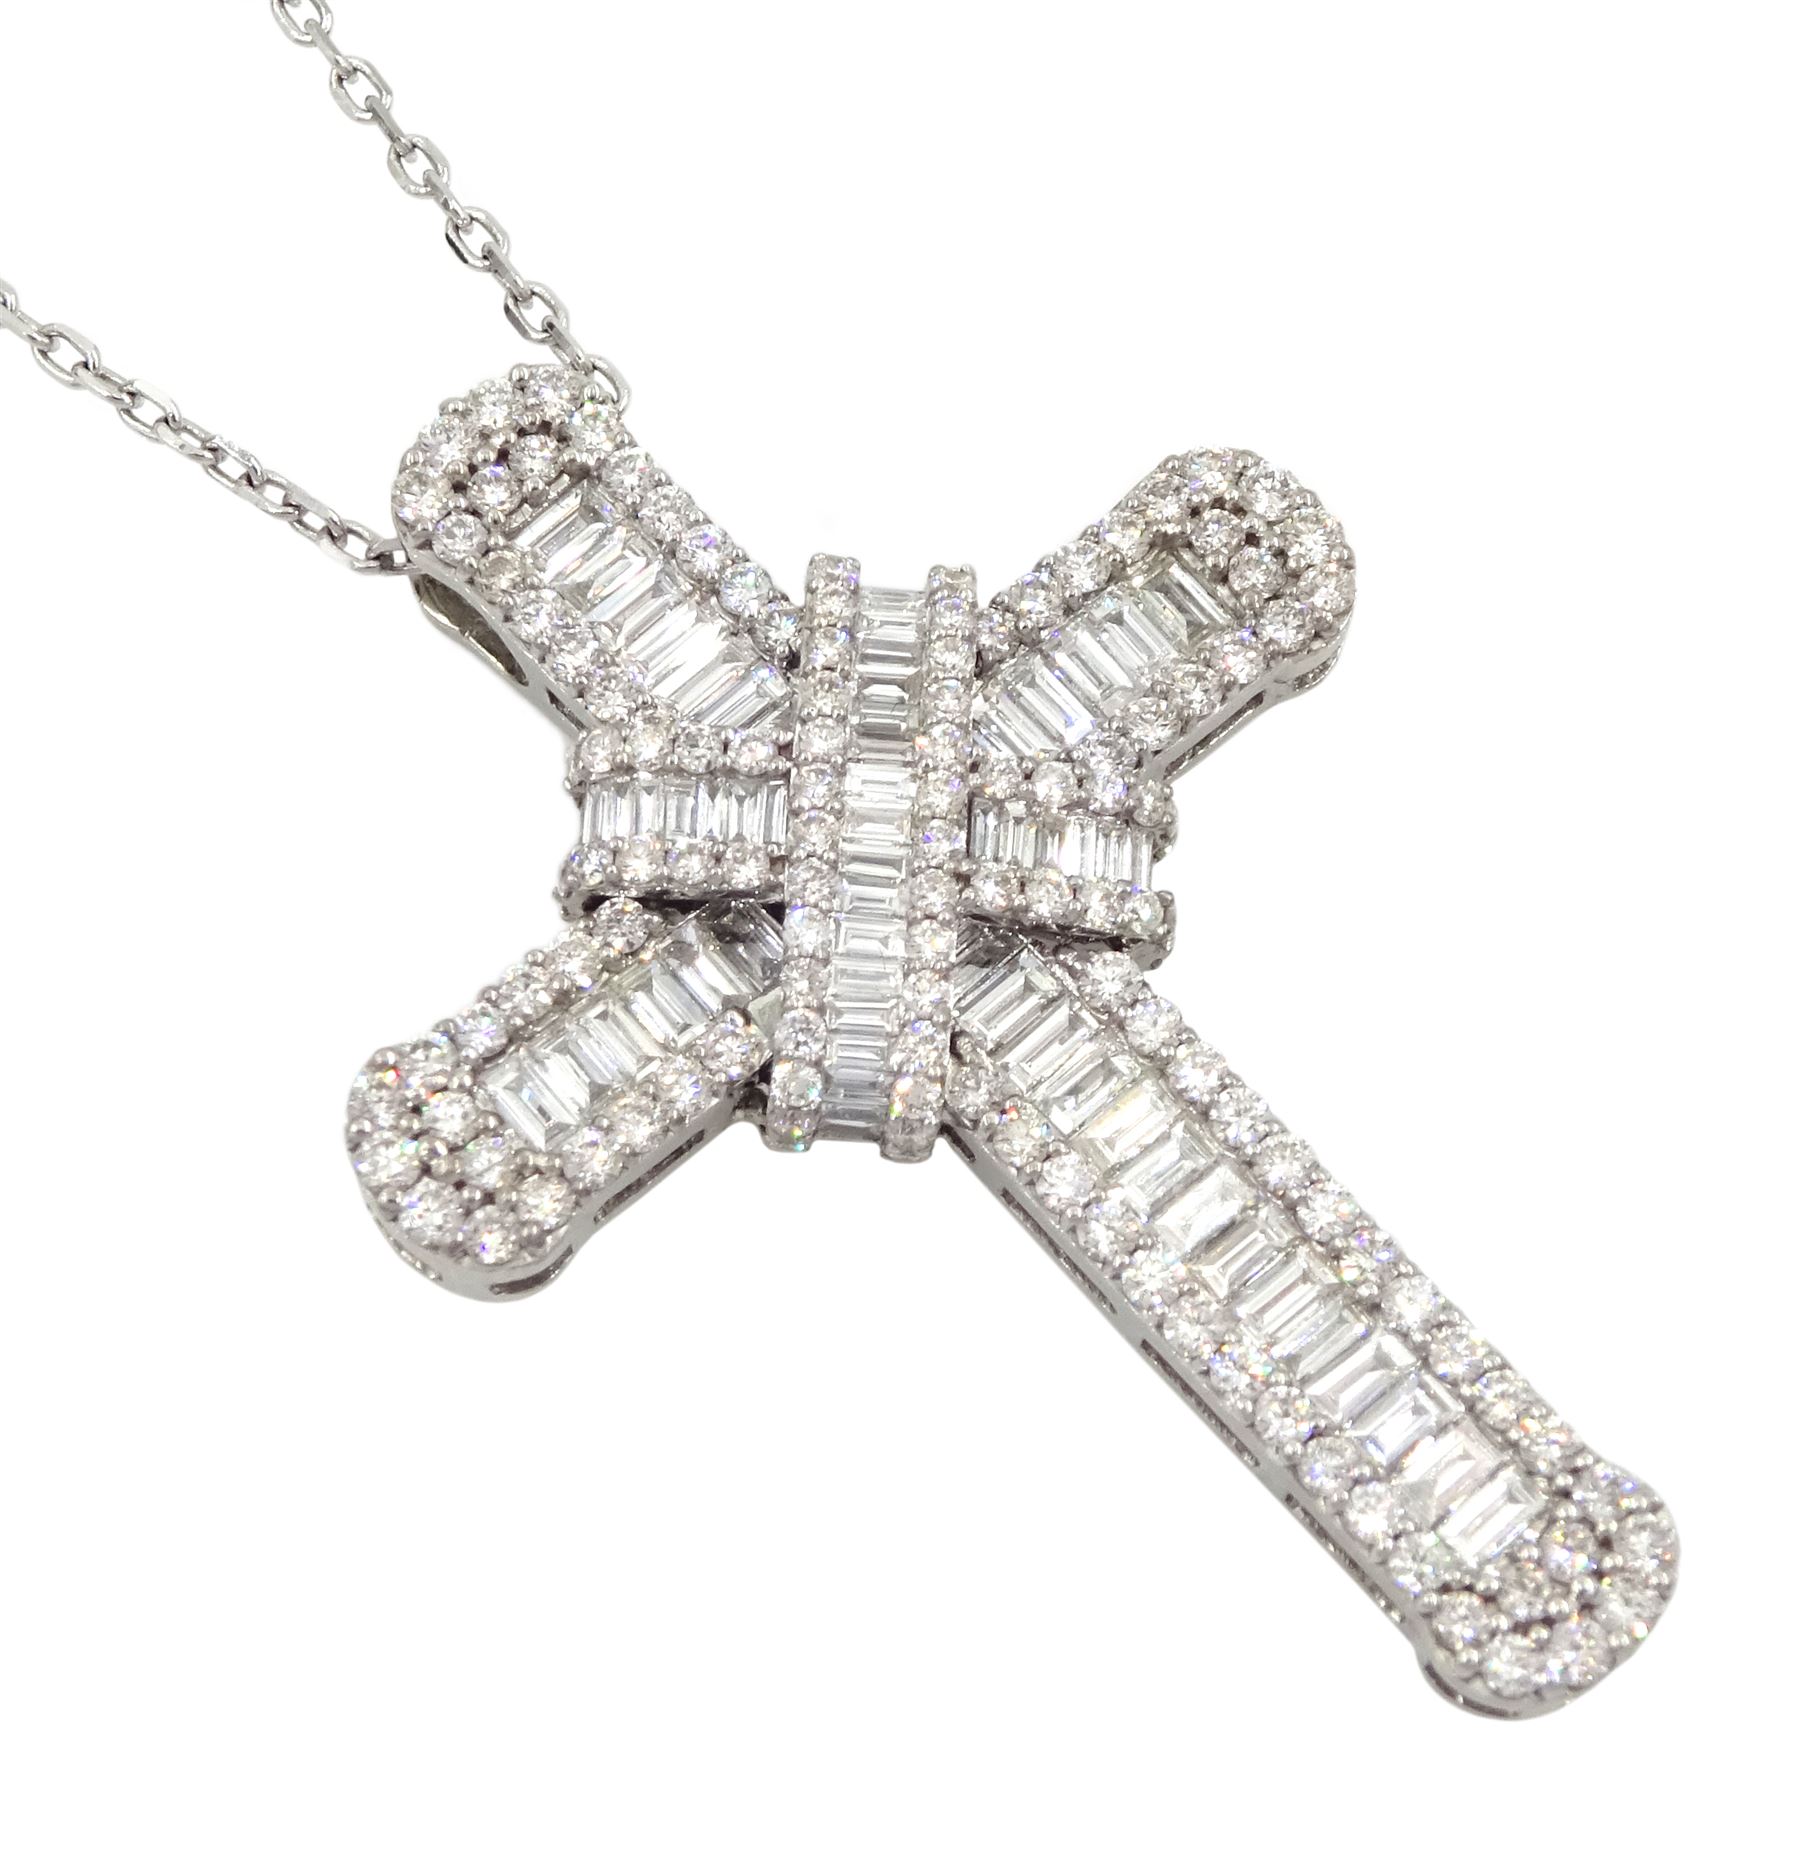 18ct white gold baguette and round brilliant cut diamond cross pendant necklace - Image 2 of 4